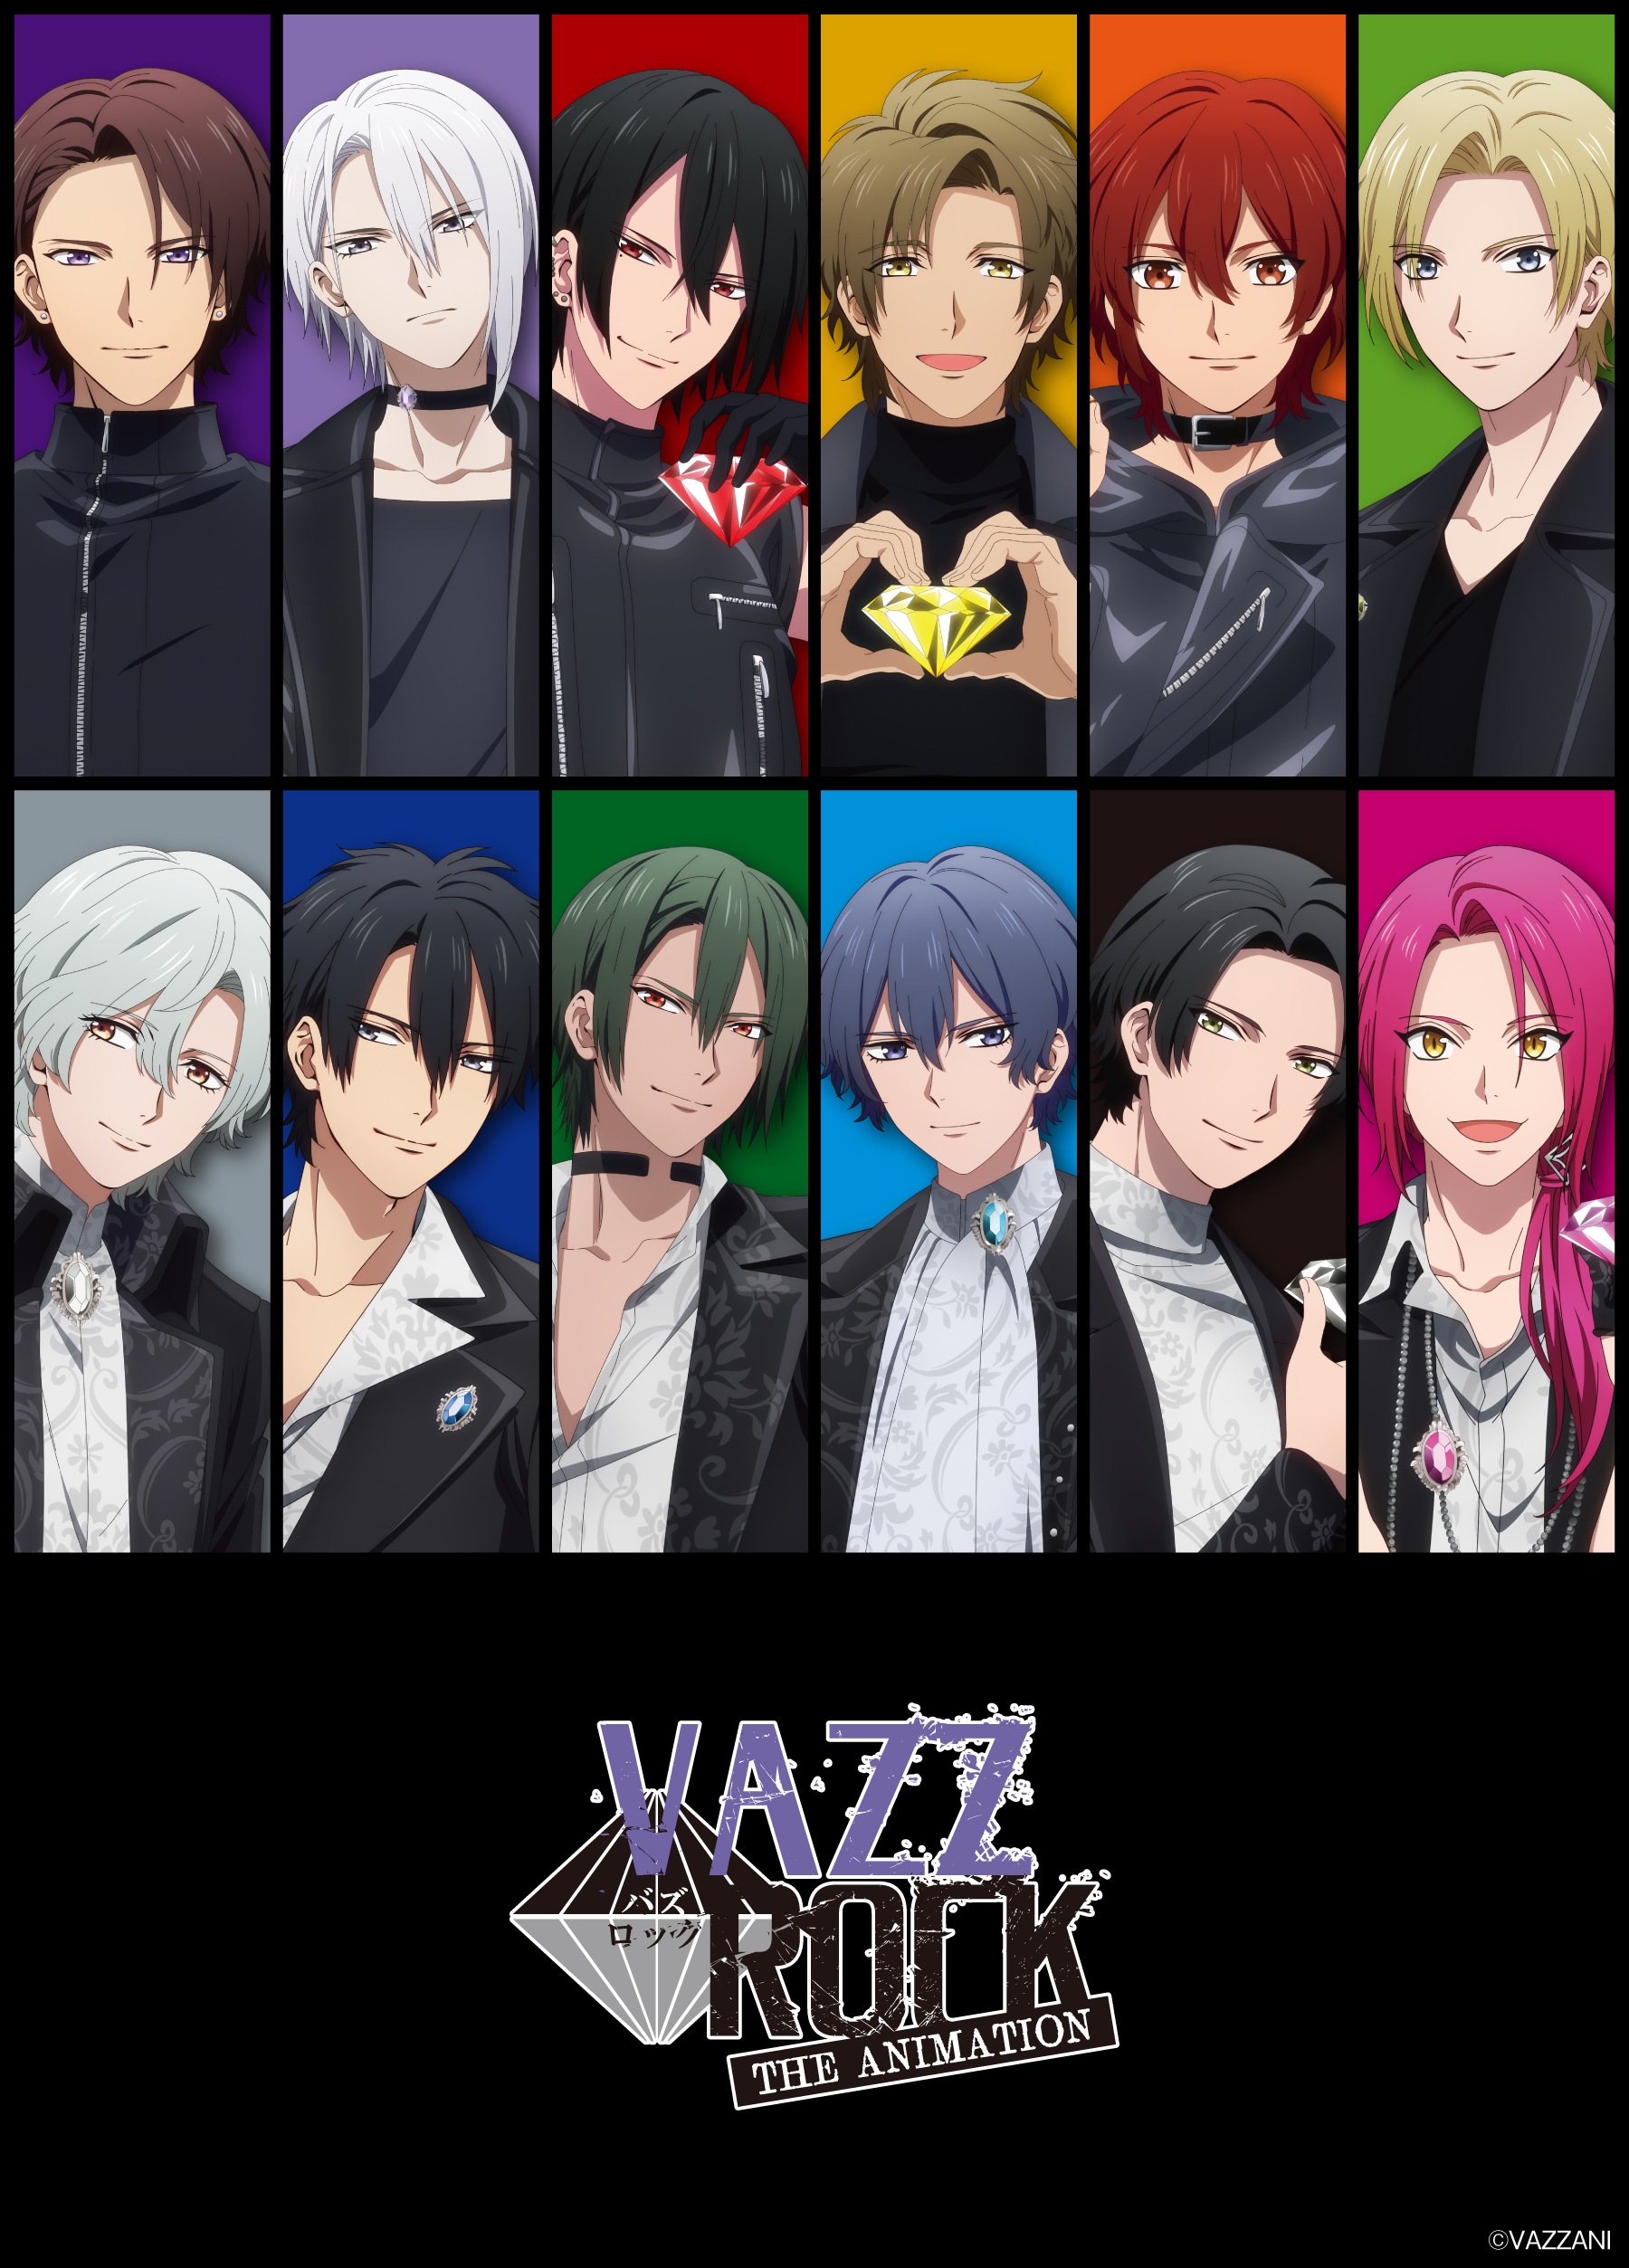 VAZZROCK THE ANIMATION オリジナルグッズ